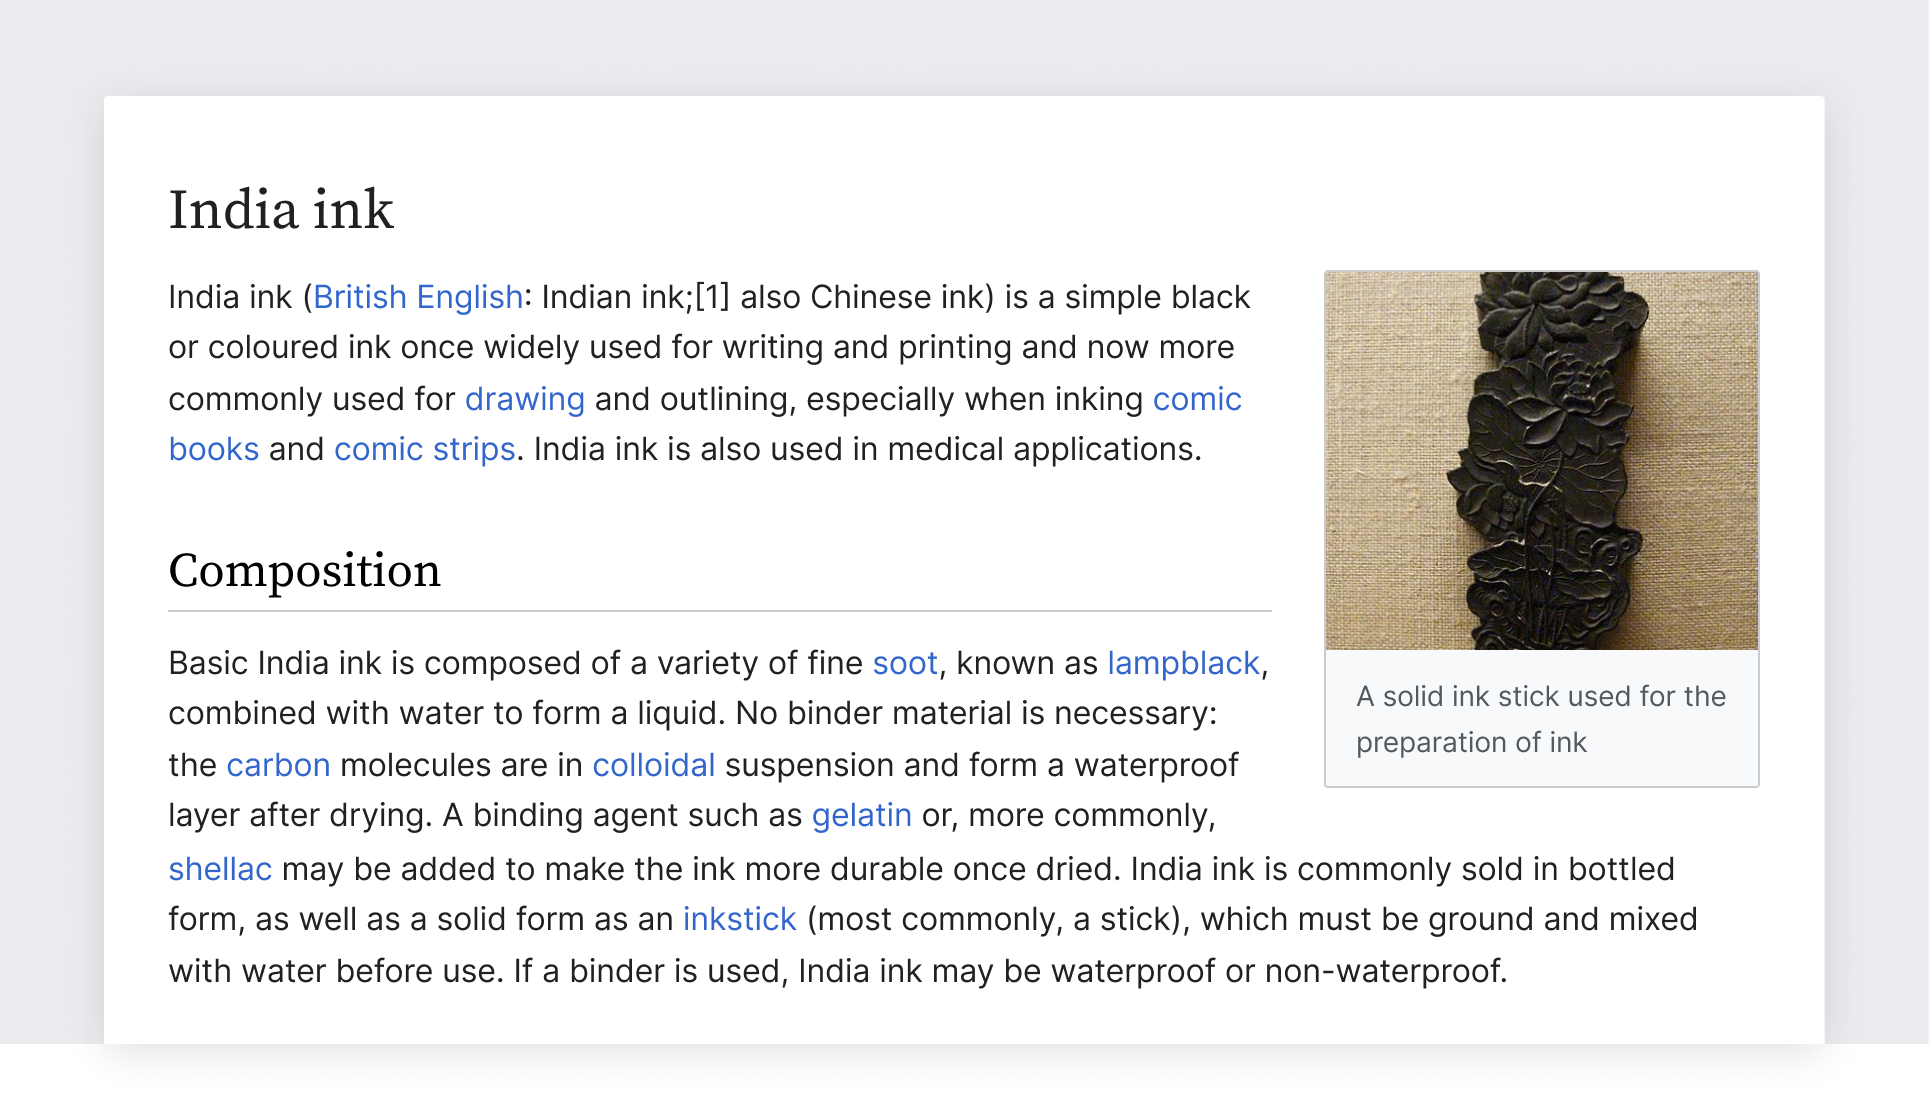 An example of an English Wikipedia article, demonstrating different typography styles.